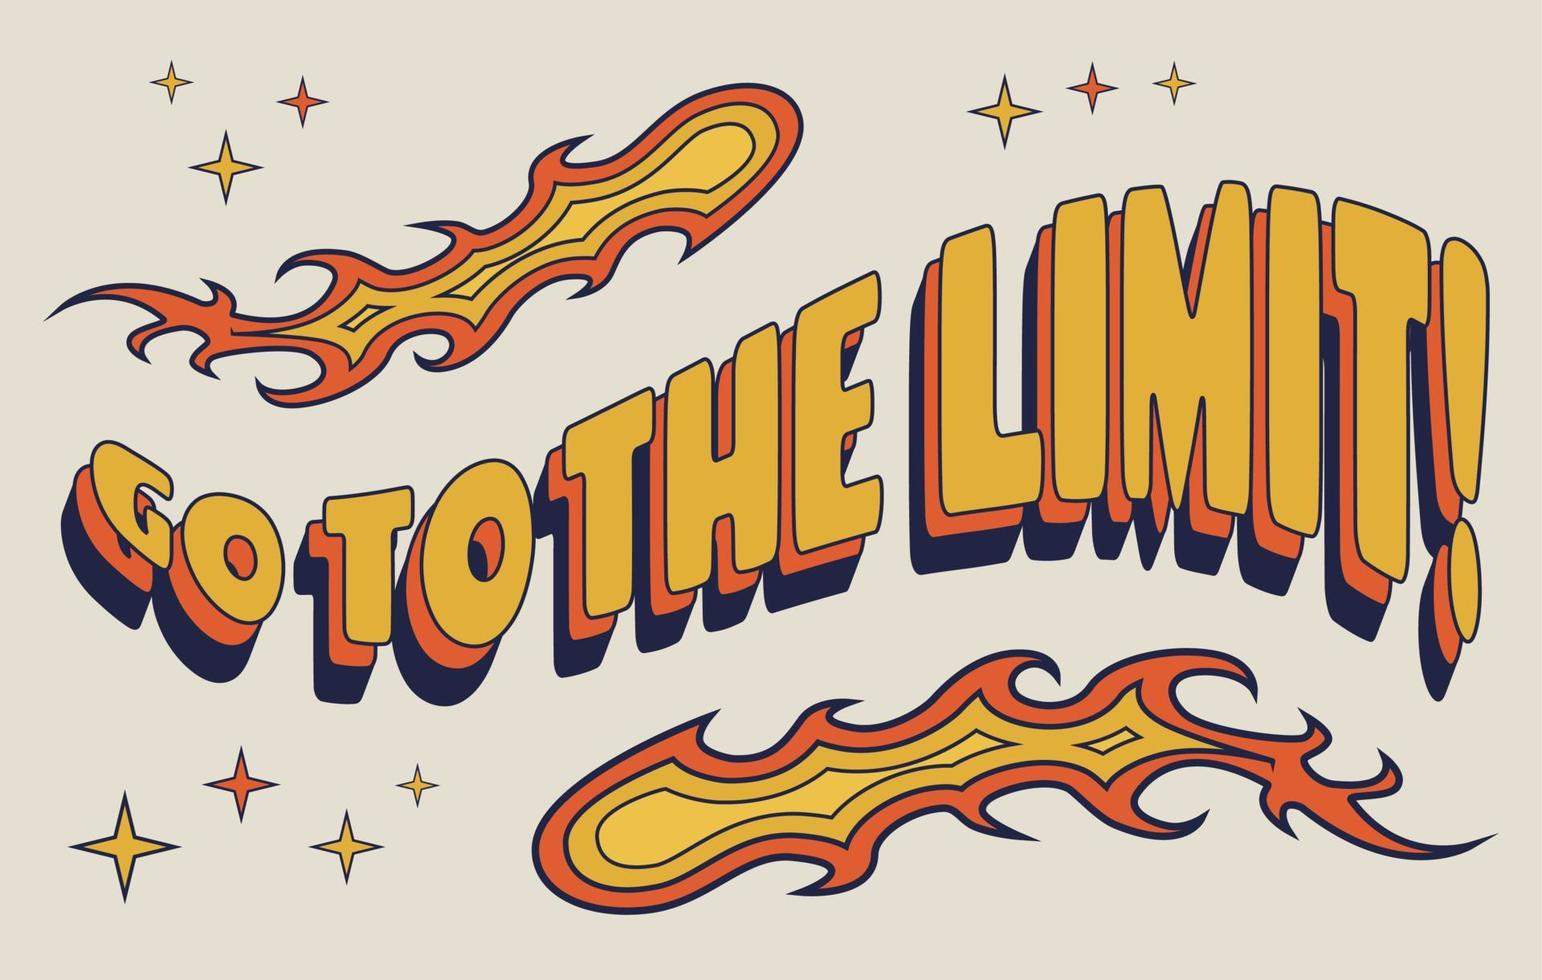 Go to the limit phrase with fire and stars, groovy poster in 1970s style, letters in groovy style, vector banner, poster, card with quotation in 70s old fashioned style.